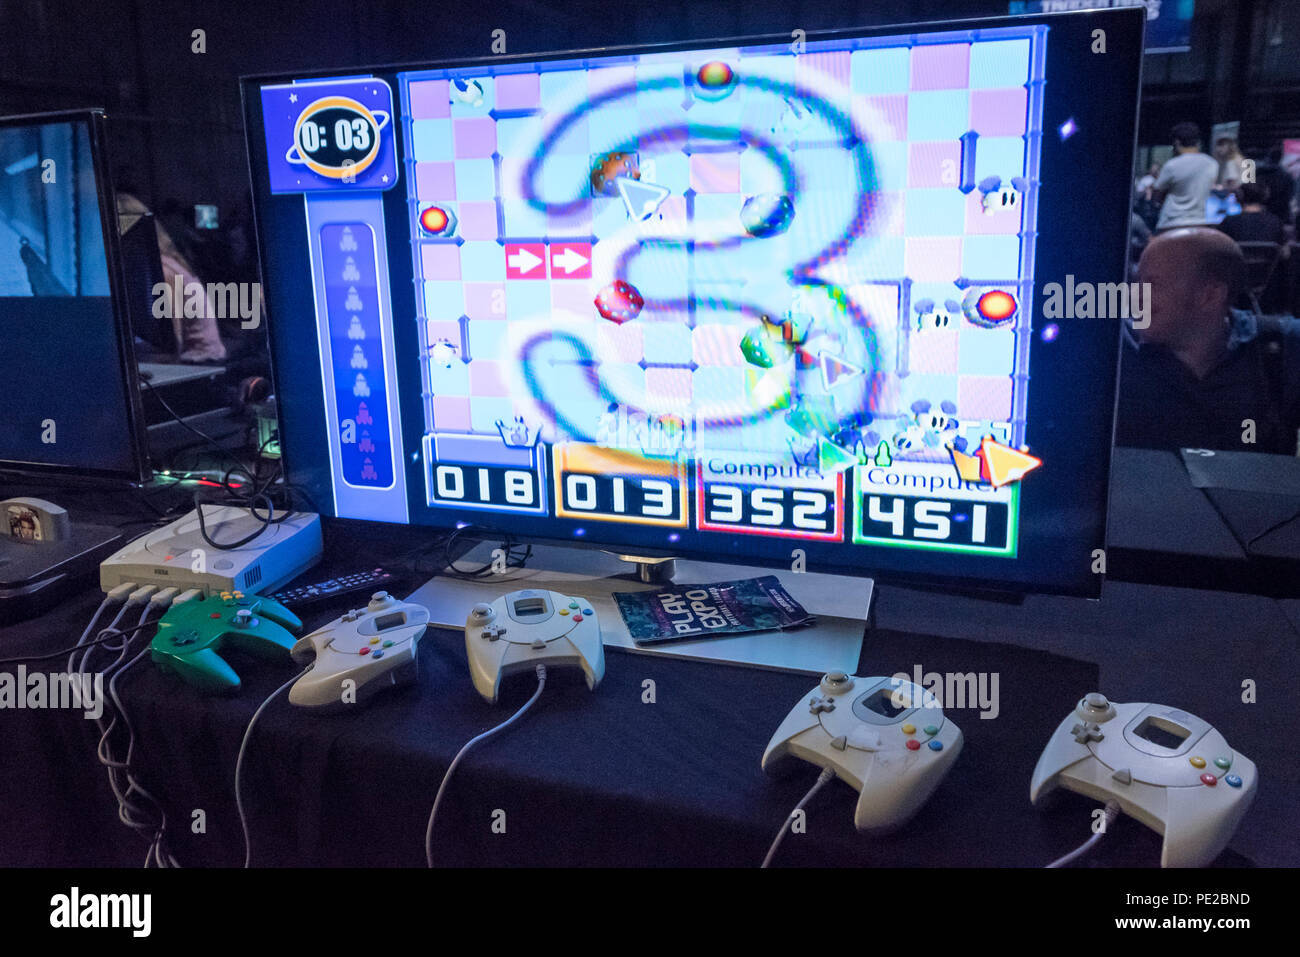 London, UK.  12 August 2018. Controllers for the Sega Dreamcast at retro games festival PLAY Expo held in London for the first time at Printworks, Canada Water. Game enthusiasts visited to rediscover the classics, from Donkey Kong, Pong, Super Mario Bros. and Space Invaders to vintage pinball machines, VR, indie games and a dedicated Minecraft zone. The show also included a sneak preview of new retro gaming streaming service, Antstream.  Credit: Stephen Chung / Alamy Live News Stock Photo